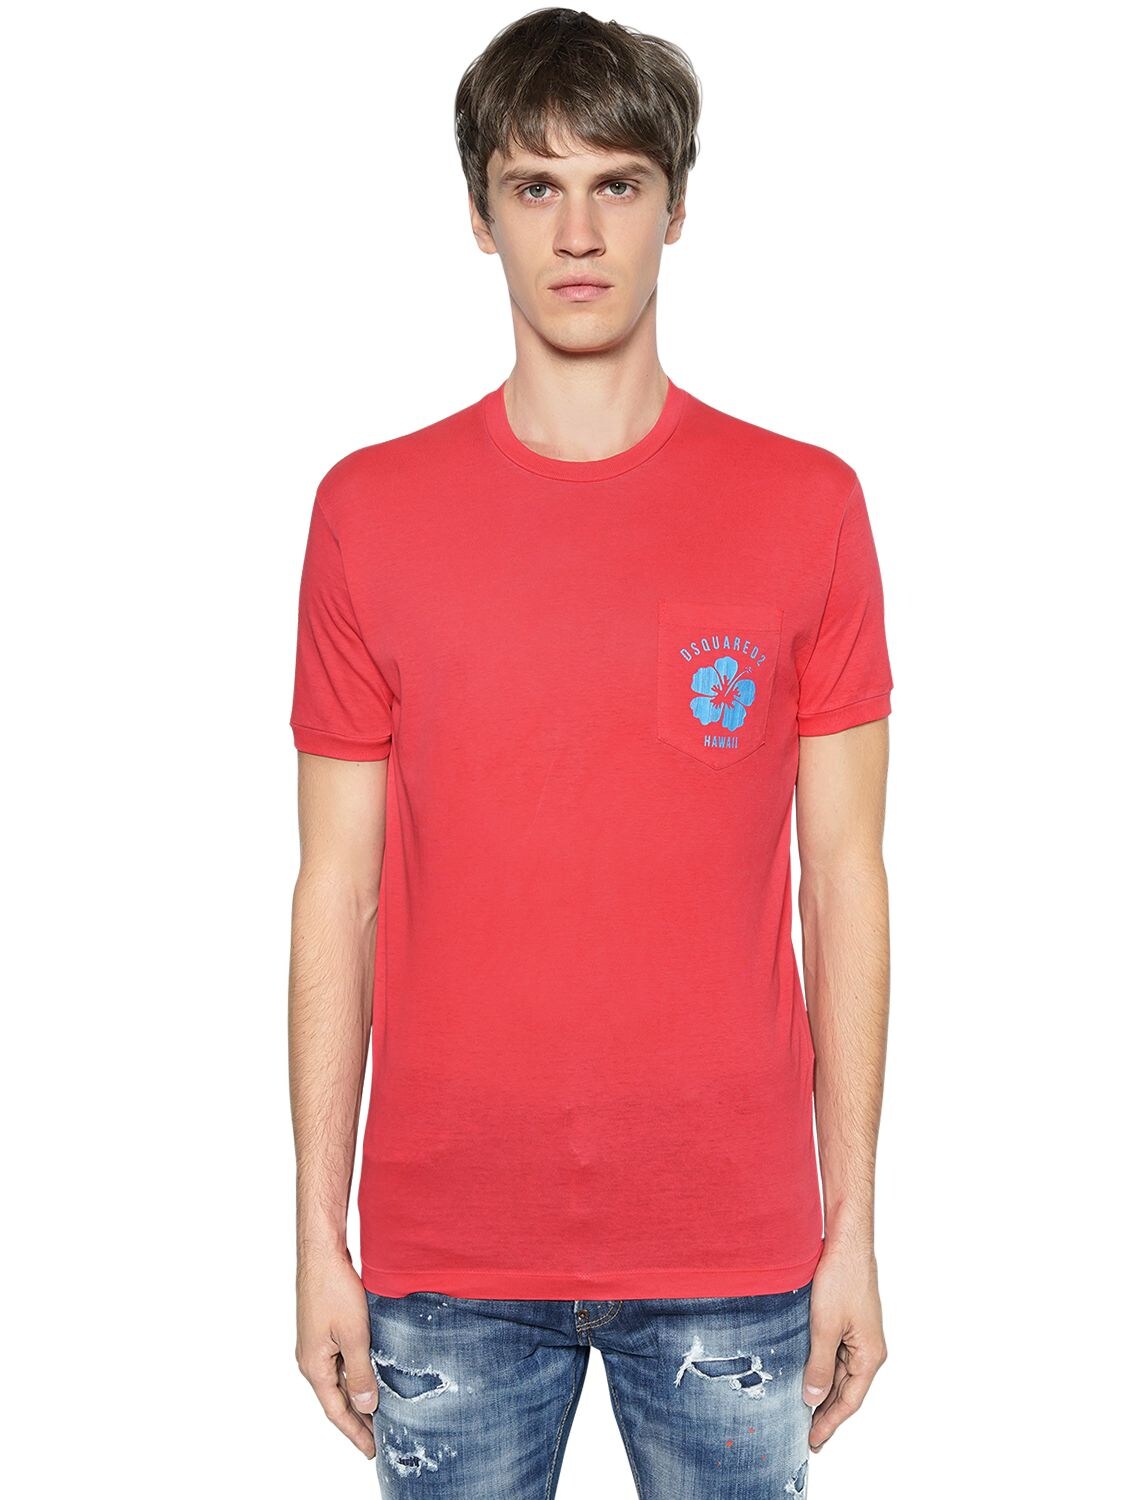 DSQUARED2 PRINTED COTTON JERSEY T-SHIRT W/ POCKET,67I04Y019-MZA00